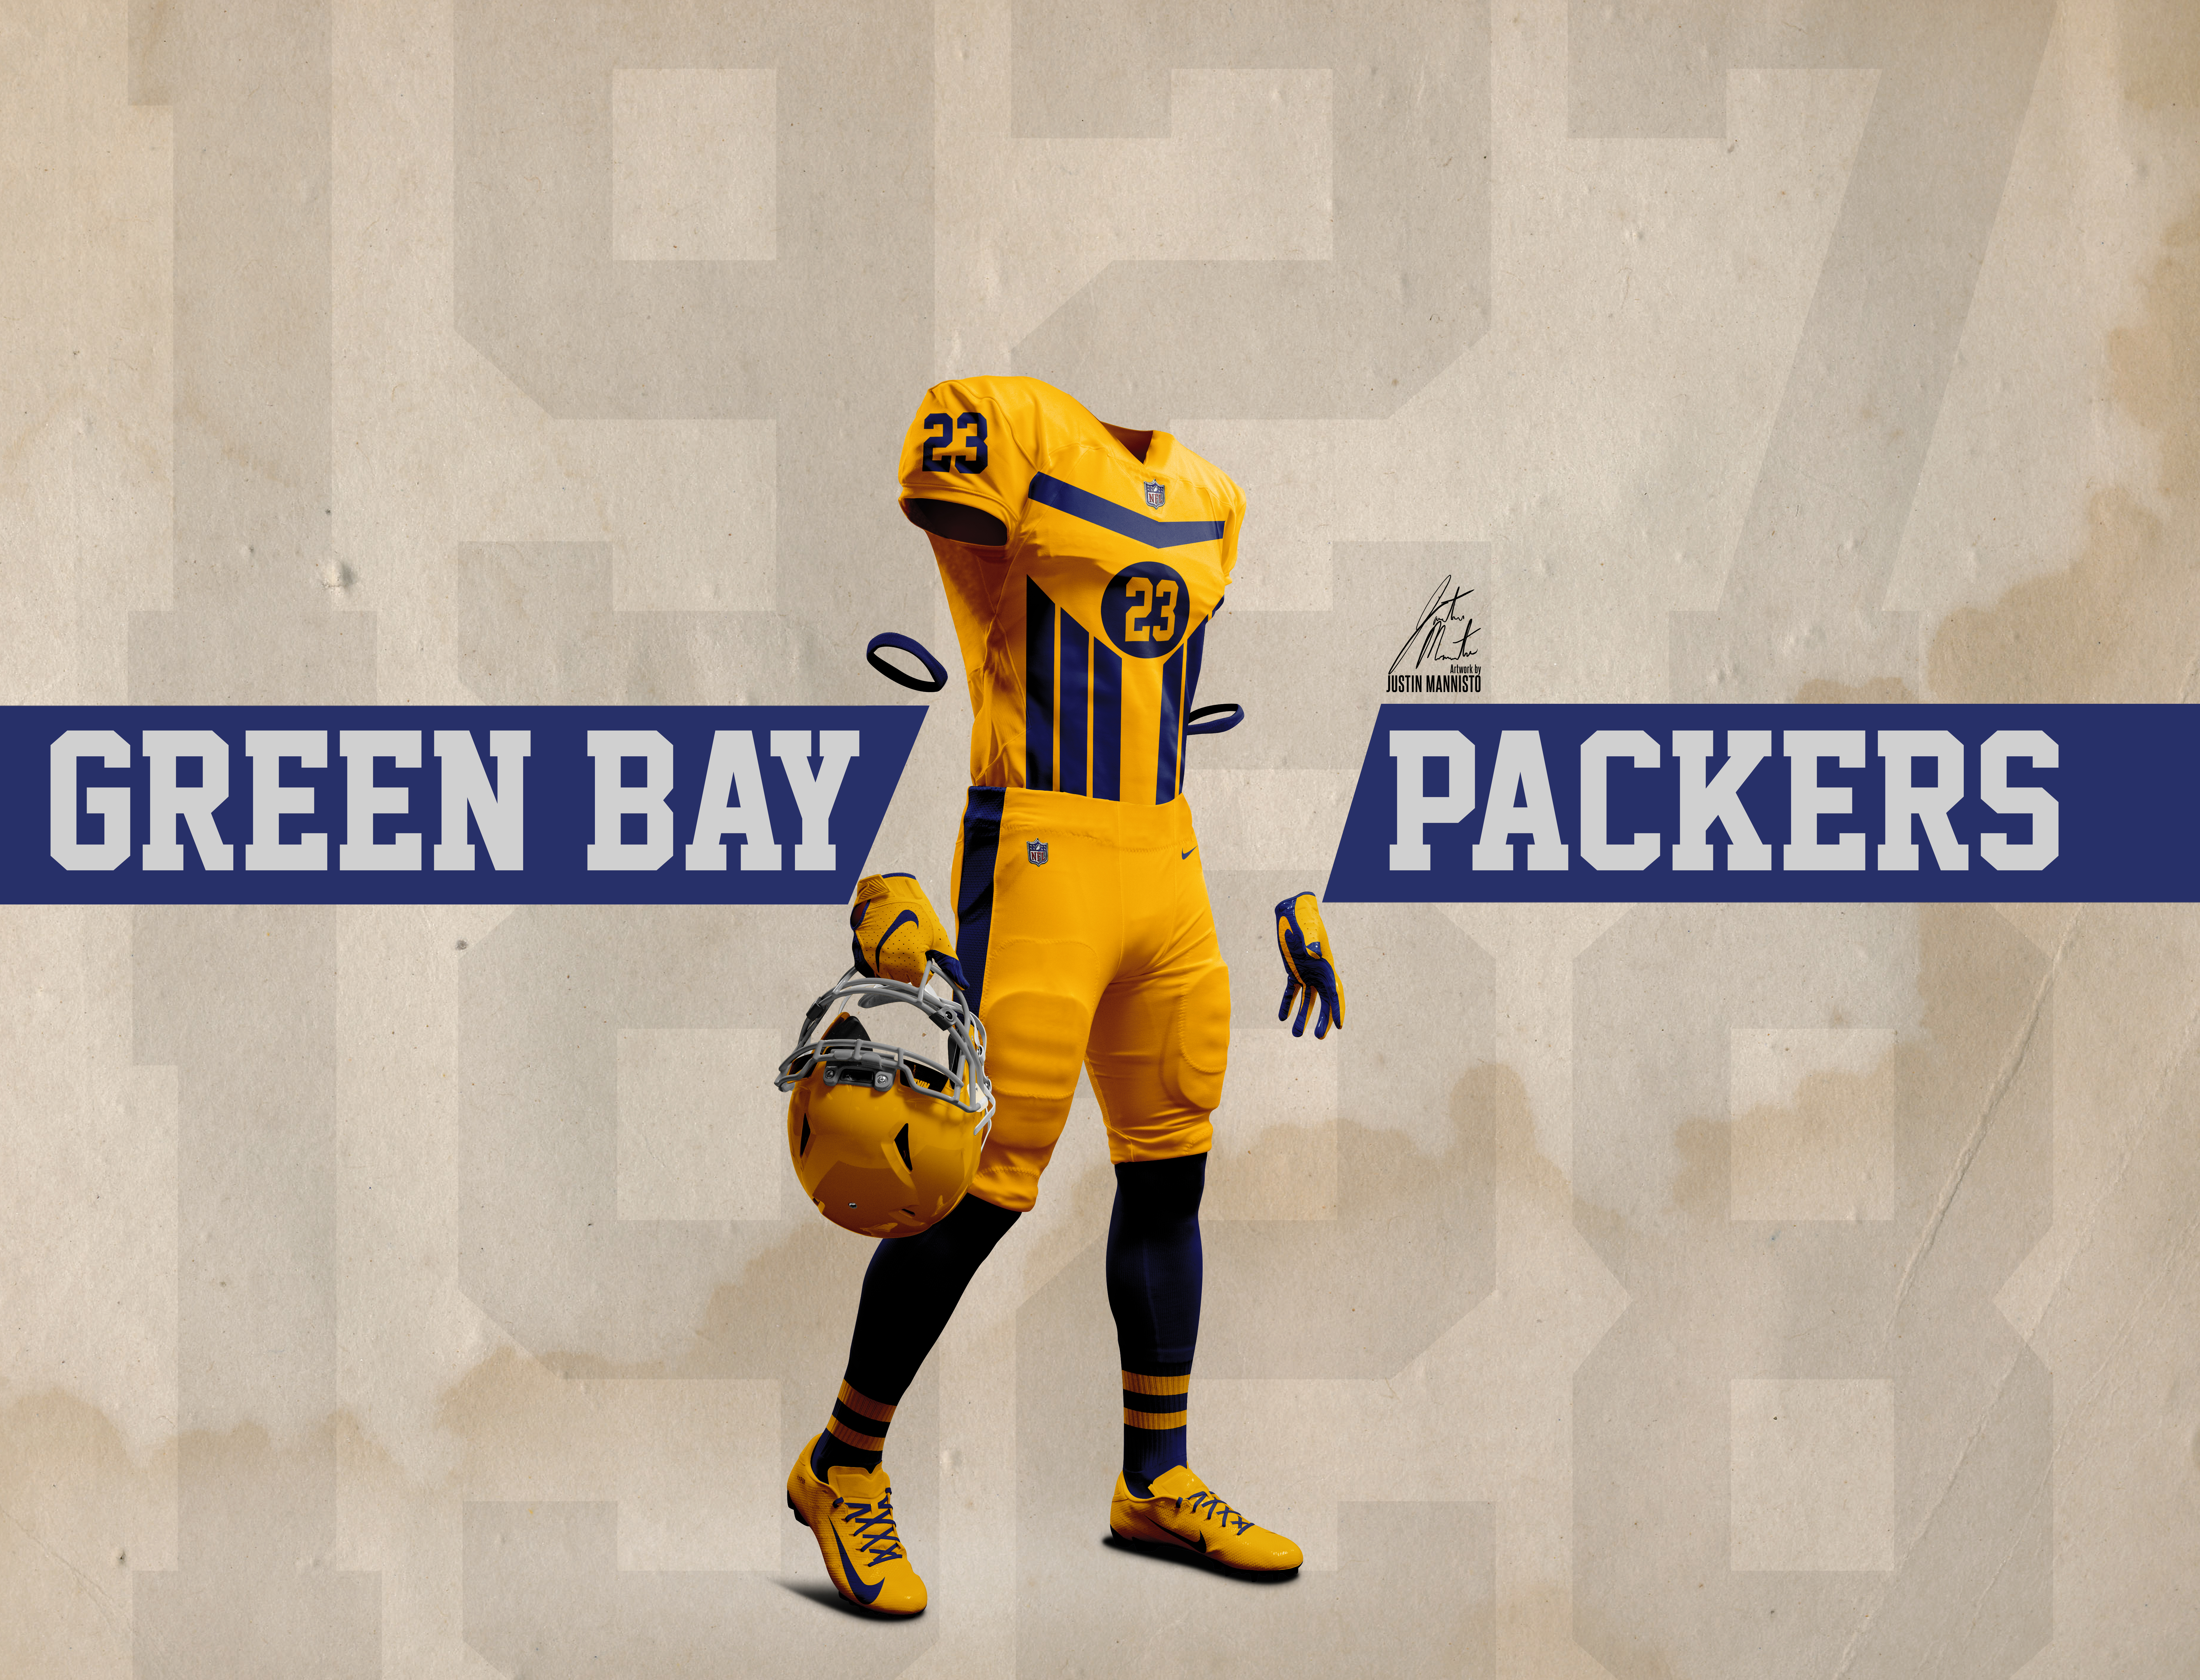 green bay packers new uniforms 2020